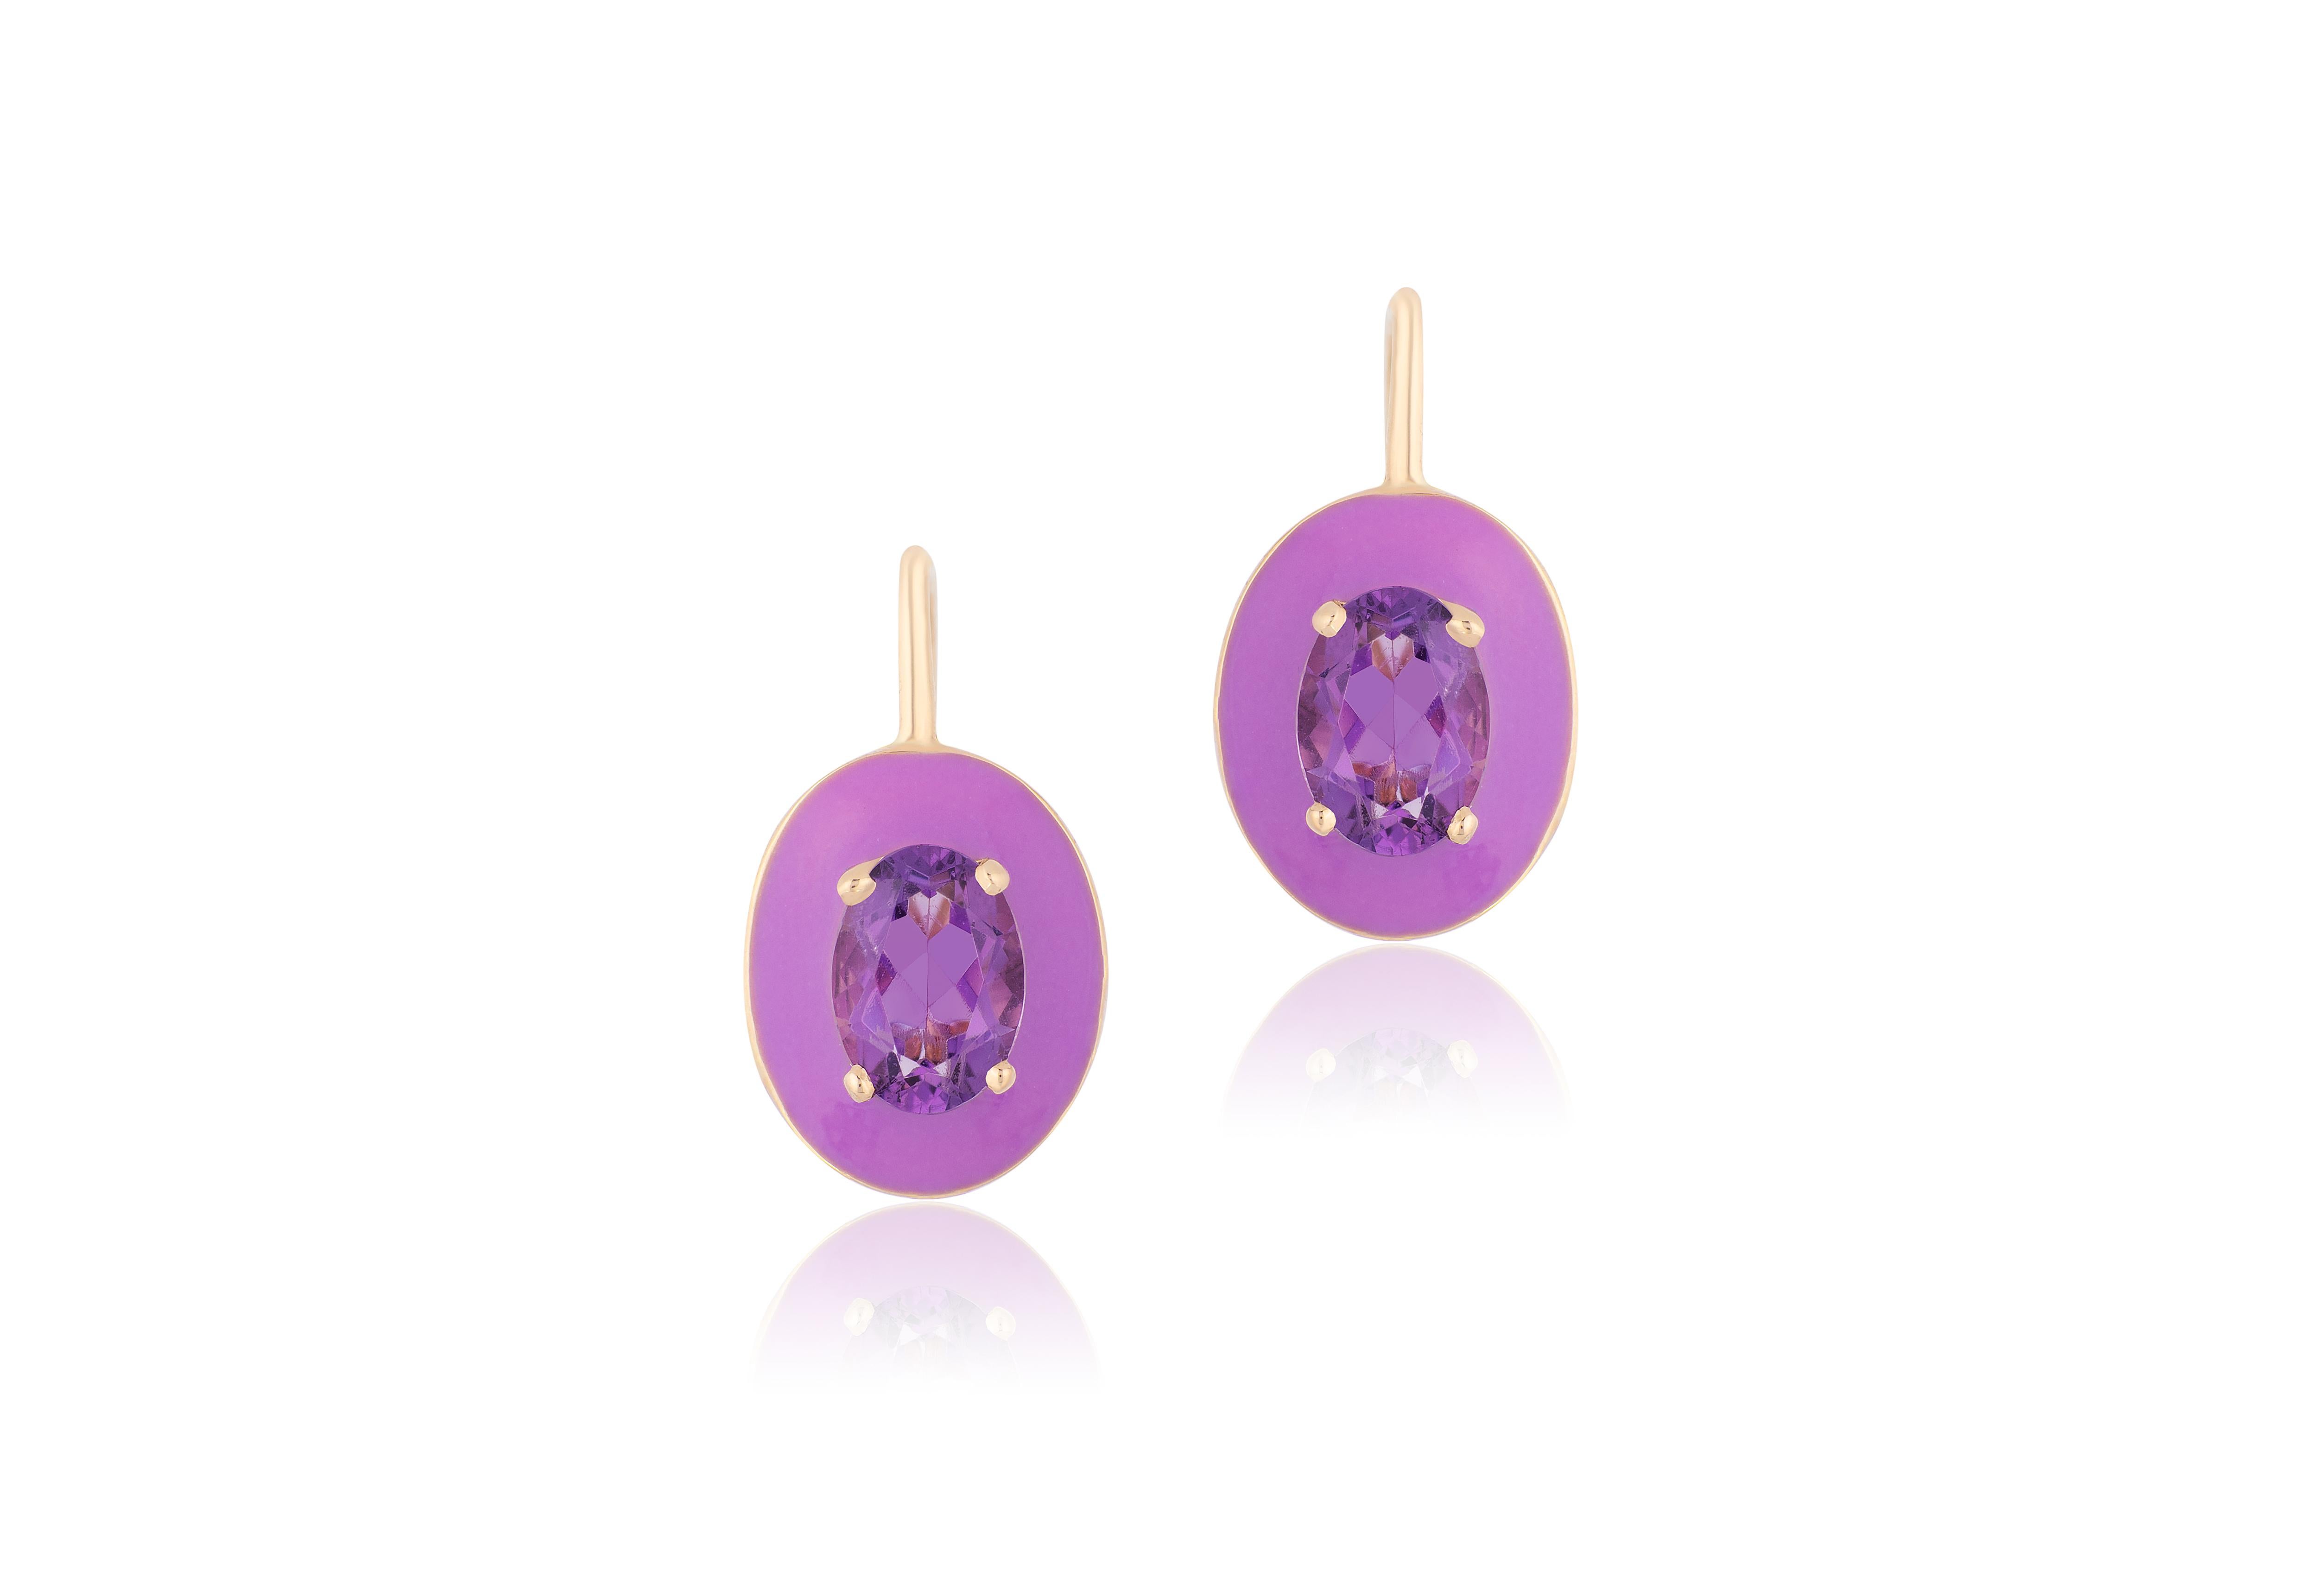 These unique earrings are a Faceted Oval Amethyst, with Purple Enamel border and Lever back. From our ‘Queen’ Collection, it was inspired by royalty, but with a modern twist. The combination of enamel, and Amethyst represents power, richness and